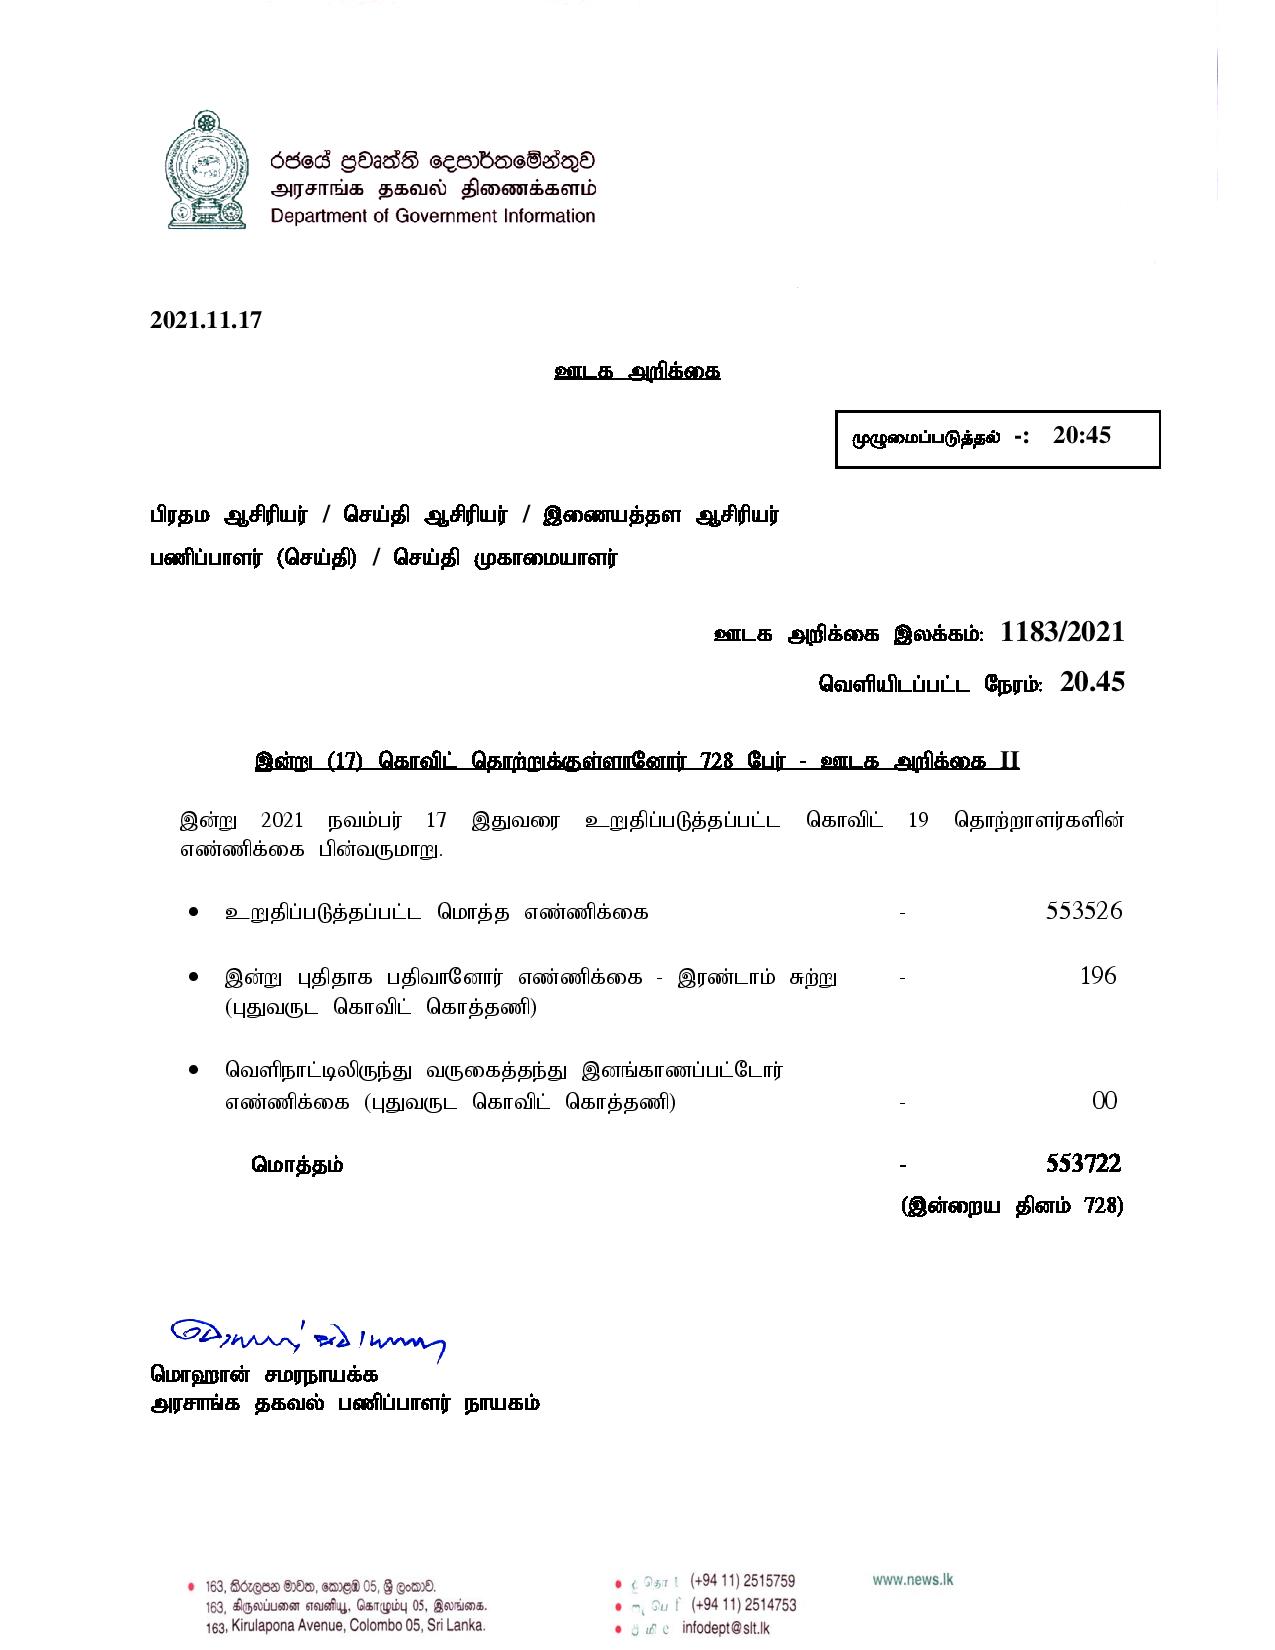 Press Release 1183 Tamil page 001